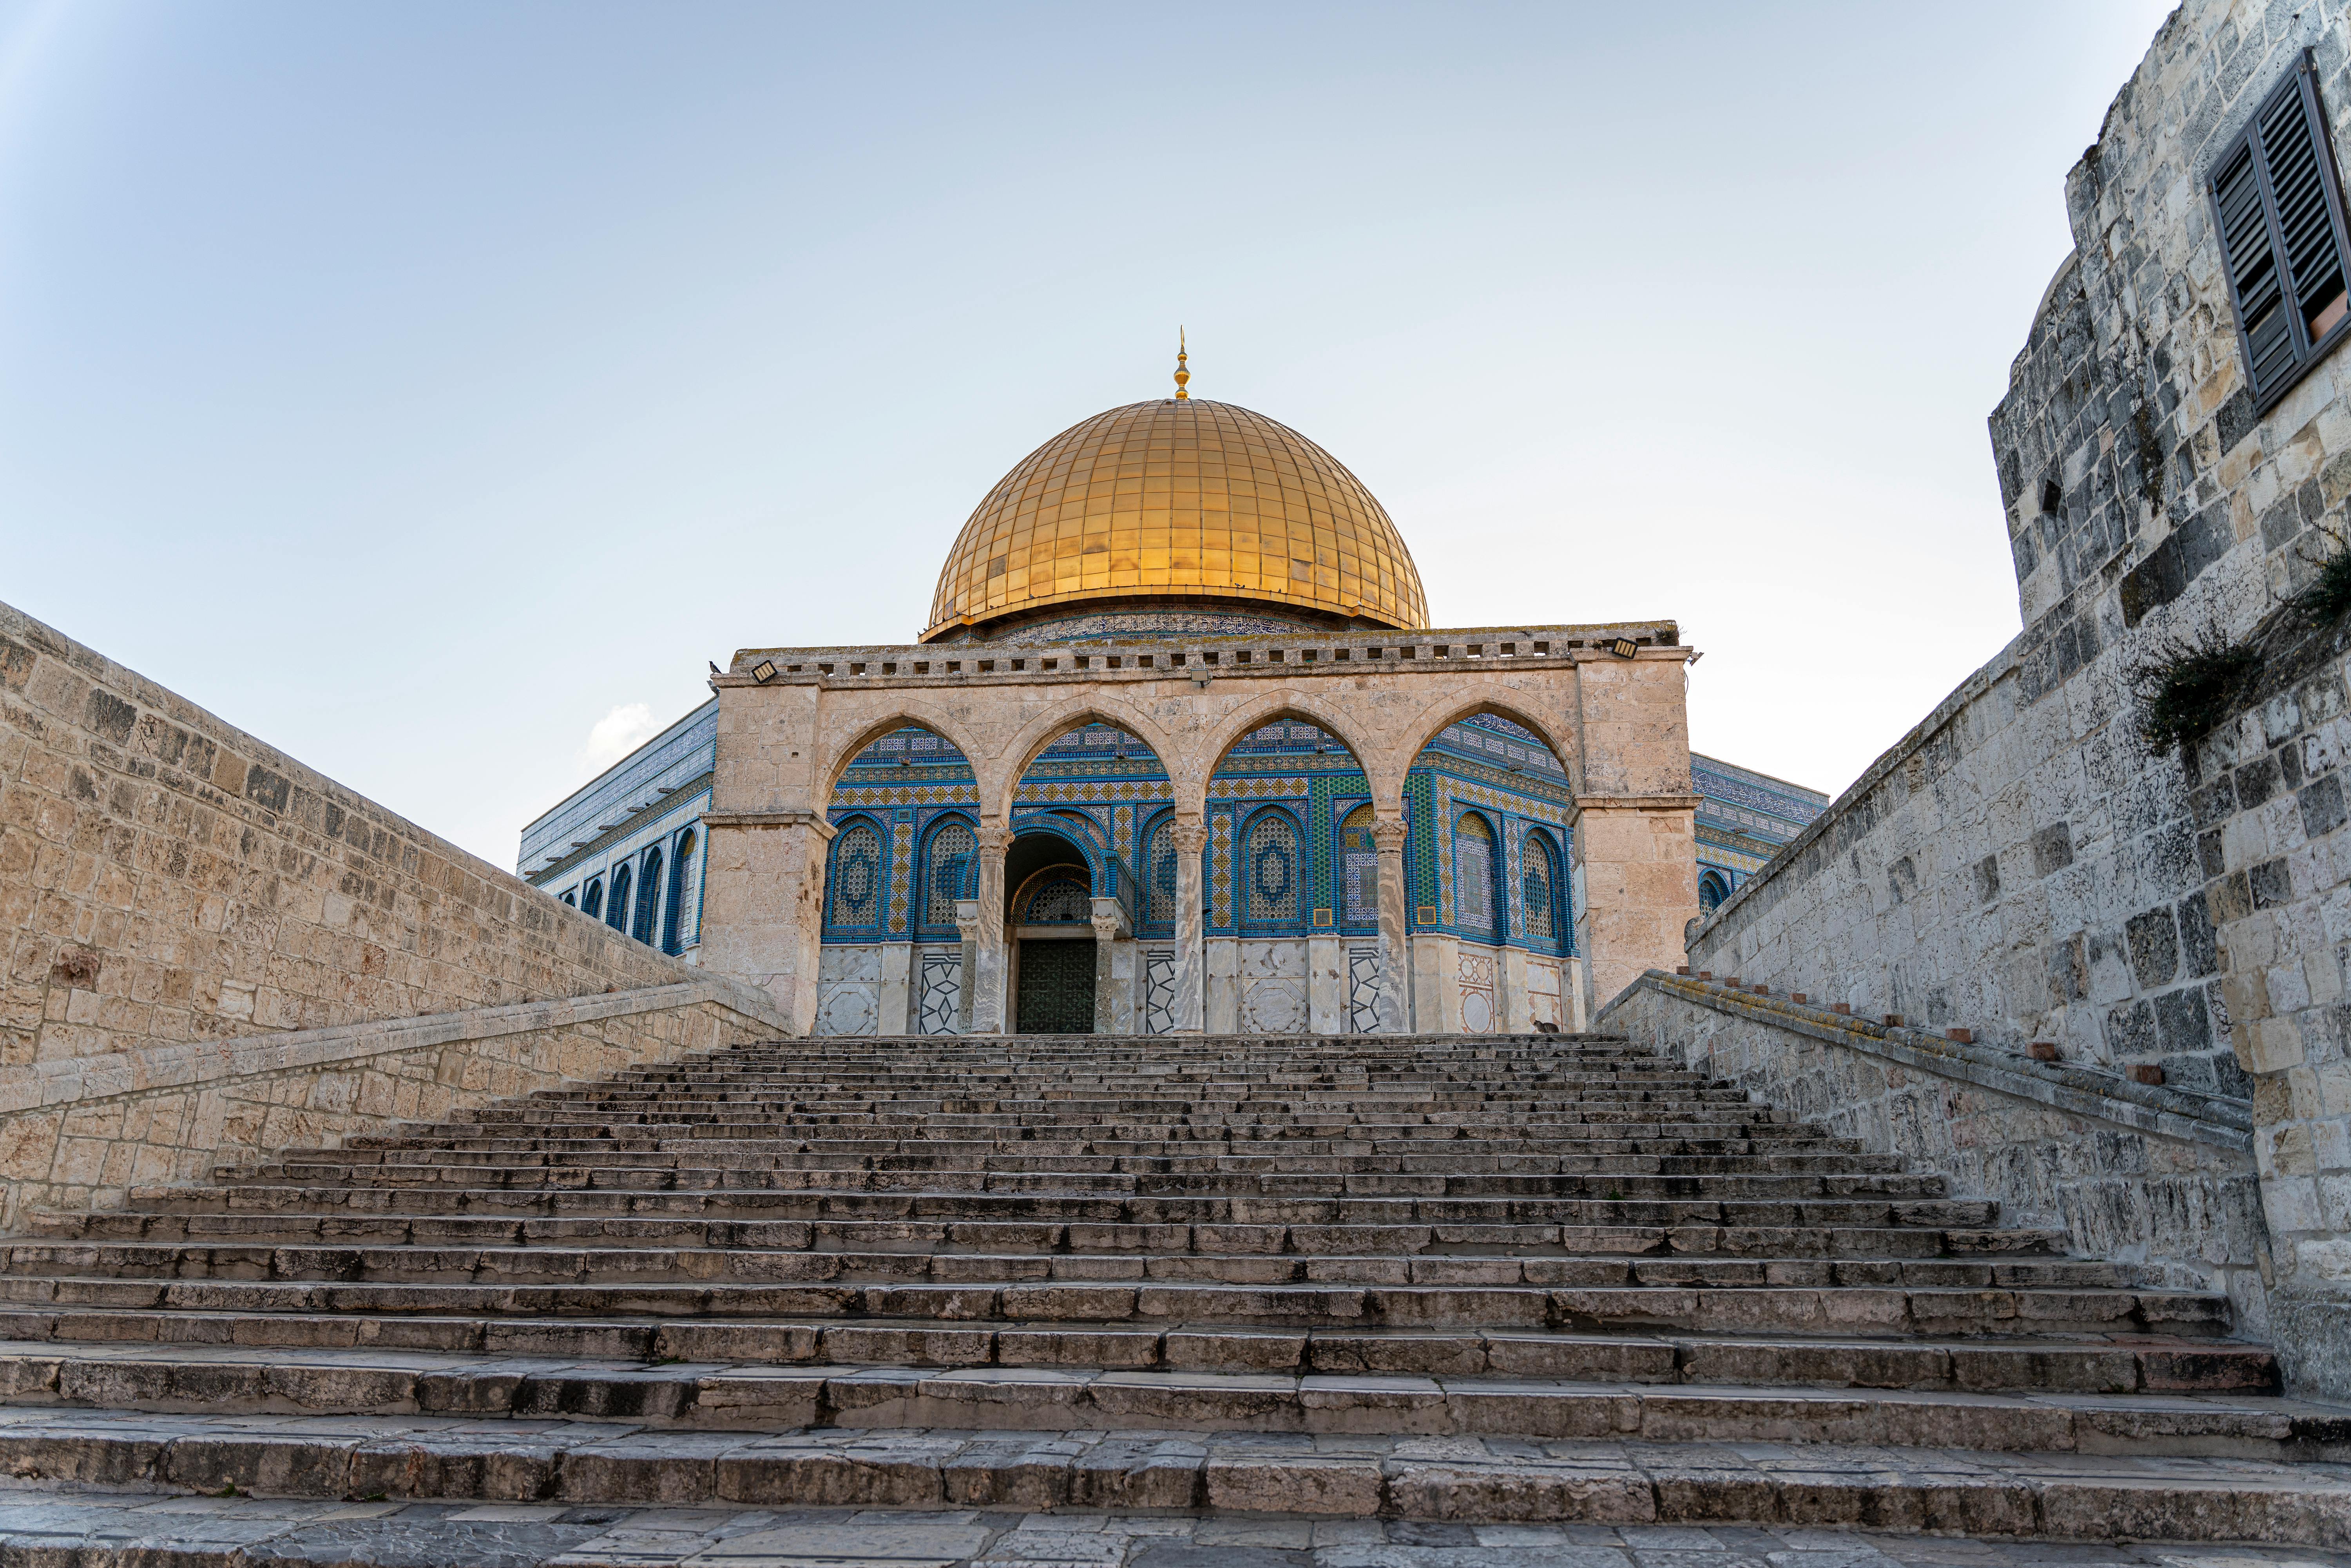 steps and architecture with golden dome